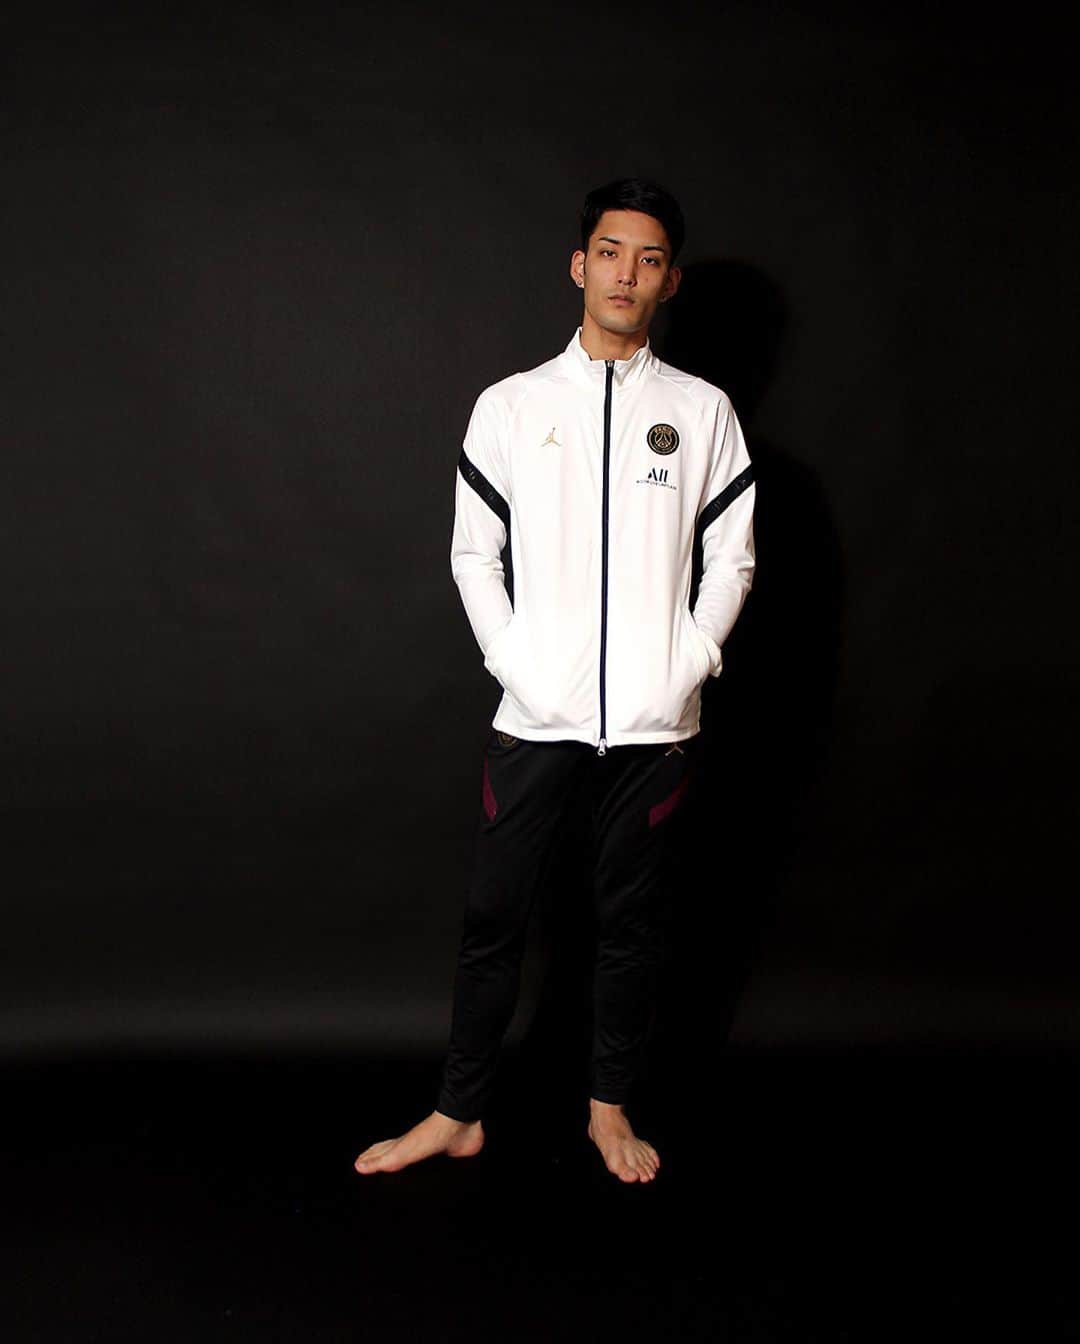 A+Sさんのインスタグラム写真 - (A+SInstagram)「2020 .10 .11 (sun) in store  ー SLIDE 1-2 ー ■NIKE PSG STRIKE DRILL TOP CL COLOR : WHITE×BORDEAUX SIZE : S - 2XL PRICE : ¥8,000 (+TAX)  パリ サンジェルマン ストライク ドリルトップは、伸縮性と速乾性に優れた素材を使用。ゲームがヒートアップしても高速プレーをサポートし、さらりと涼しい着心地をキープします。 スリムなデザインとサムホールで、スピード重視のすっきりとしたフィット感が持続。  Parisian pride meets iconic Jordan in the Paris Saint-Germain Strike Drill Top. Sweat-wicking fabric in a slim design helps you stay focused during practice. Thumbholes hold your stretchy sleeves in place—and remain hidden when not in use.  ー SLIDE 3-4 ー ■NIKE PSG STRIKE K CL TRACK JACKET COLOR : WHITE×BLACK SIZE : S - 2XL PRICE : ¥7,500 (+TAX)  シグネチャースタイルでジップアップ。パリ・サンジェルマンのストライクトラックジャケットでウォームアップ。滑らかで少し伸縮性のある生地でできており、肌から汗を発散させて体をドライに保ちます。  ZIP UP IN SIGNATURE STYLE. Warm up in the Paris Saint-Germain Strike Track Jacket. It's made of smooth, slightly stretchy fabric that moves sweat from your skin to help keep you dry.  ■NIKE PSG STRIKE KP CL PANT COLOR : BLACK SIZE : S - 2XL PRICE : ¥8,000 (+TAX)  パリ サンジェルマン ストライク パンツは、ストレッチ素材を使用したスリムなデザイン。ボールさばきを妨げずに自在に動けるスタイルです。 試合がヒートアップしても、速乾性テクノロジーが機能を発揮。通気性に優れたウエストバンドが、クールな状態をキープします。  Parisian pride meets iconic Jordan with the Paris Saint-Germain Strike Pants. They're made of sweat-wicking fabric in a streamlined design, so nothing comes between you and the ball.  #a_and_s #NIKE #PSG #JORDAN #JUMPMAN #JUMPMAN23 #NIKEJORDAN #JORDANBRAND #JORDANBRANDPSG #CICESTPARIS #PANAME」10月7日 11時45分 - a_and_s_official